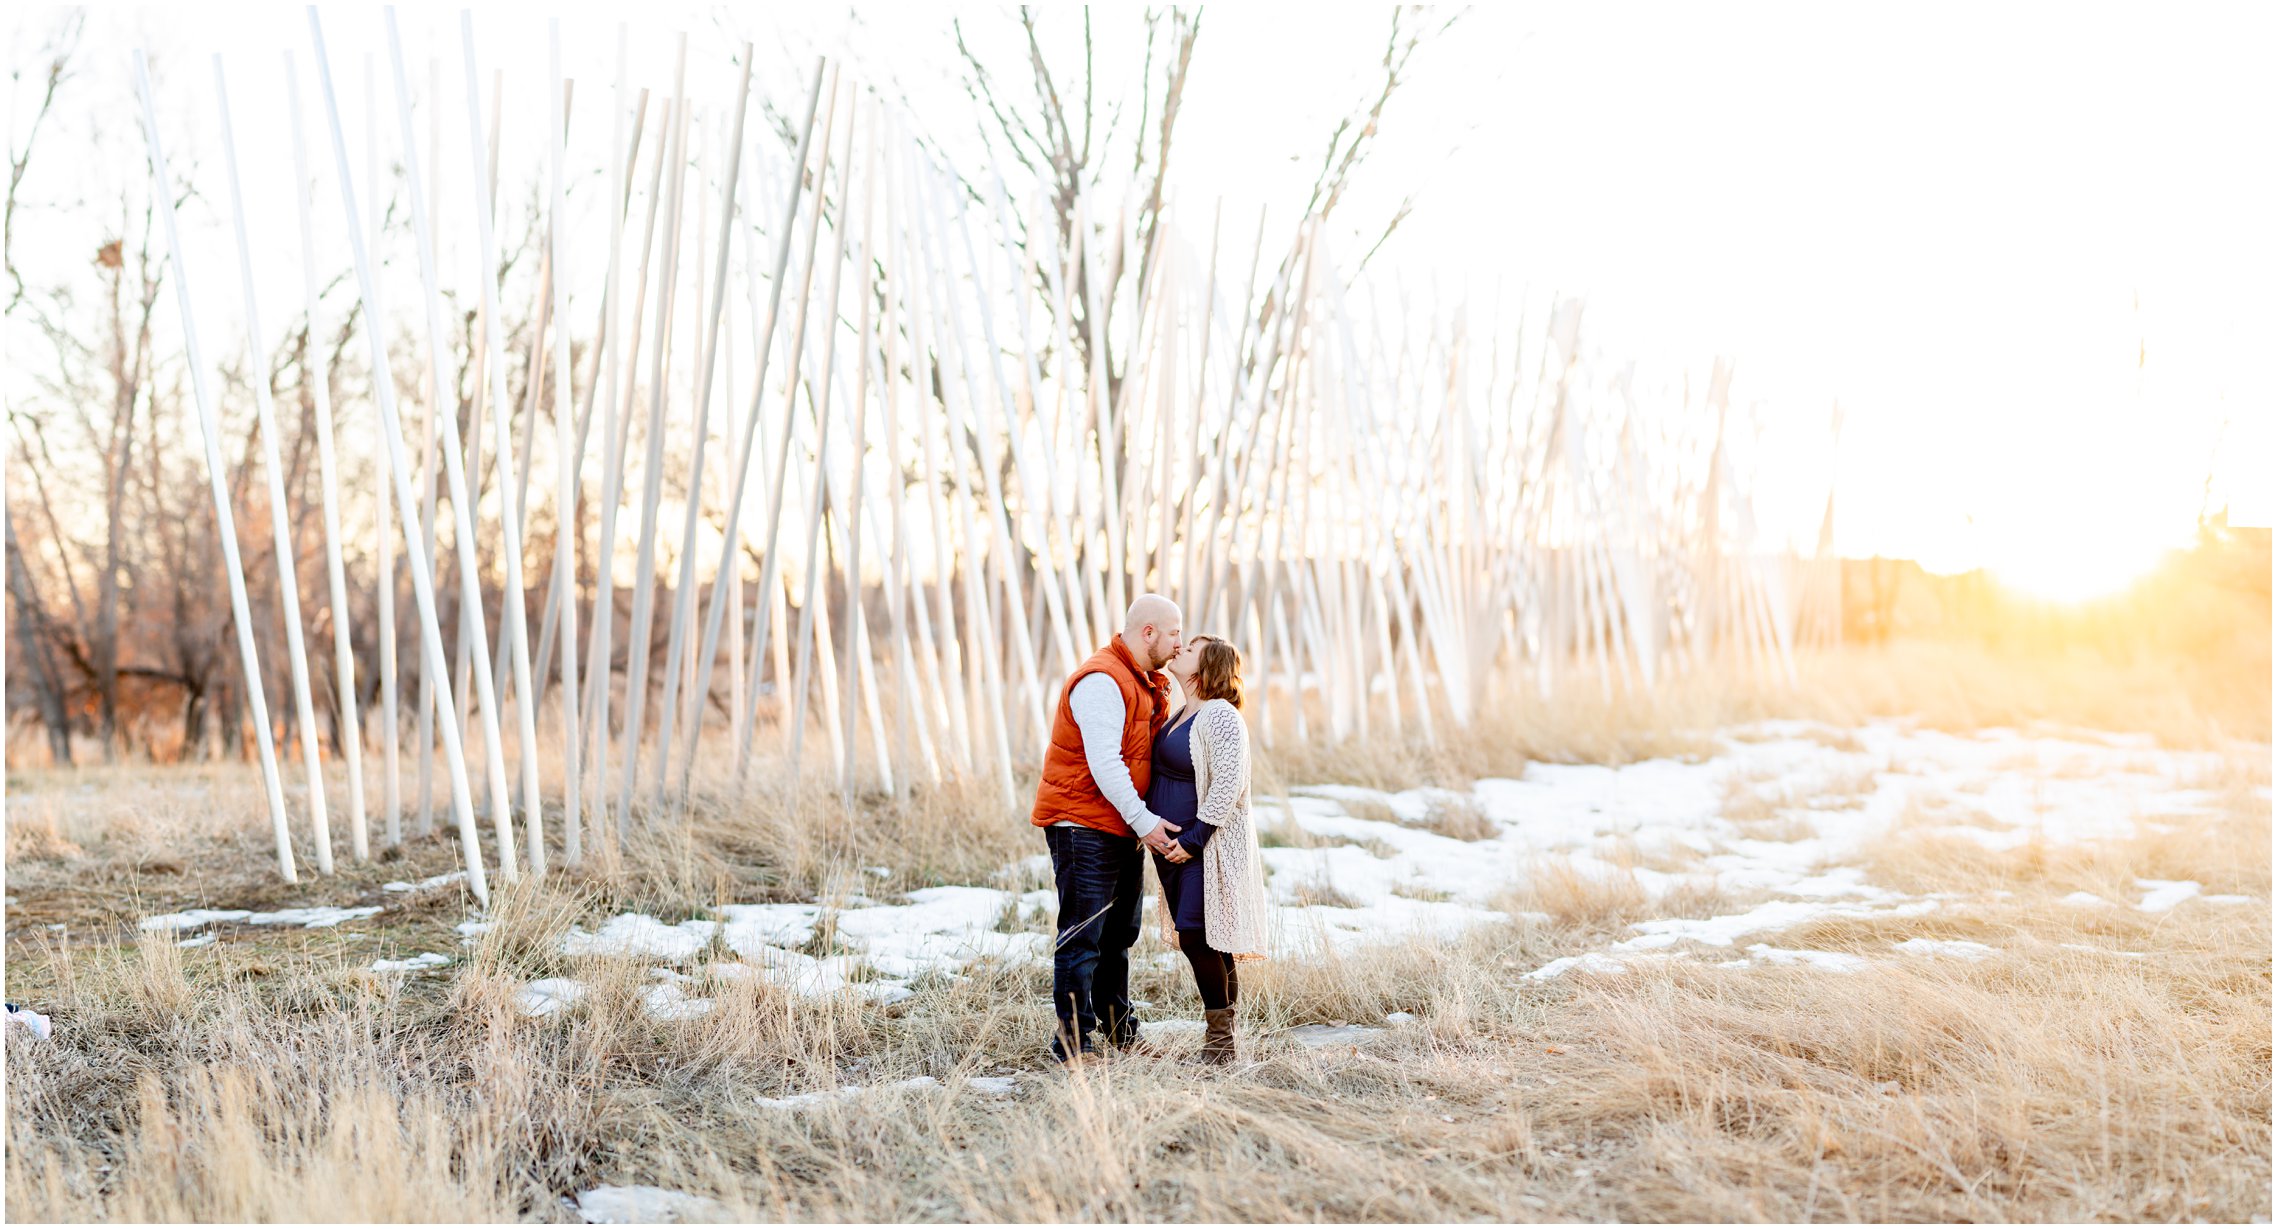 Golden light maternity session in Greeley, Colorado photographed by Sioux City Materntiy Photographer